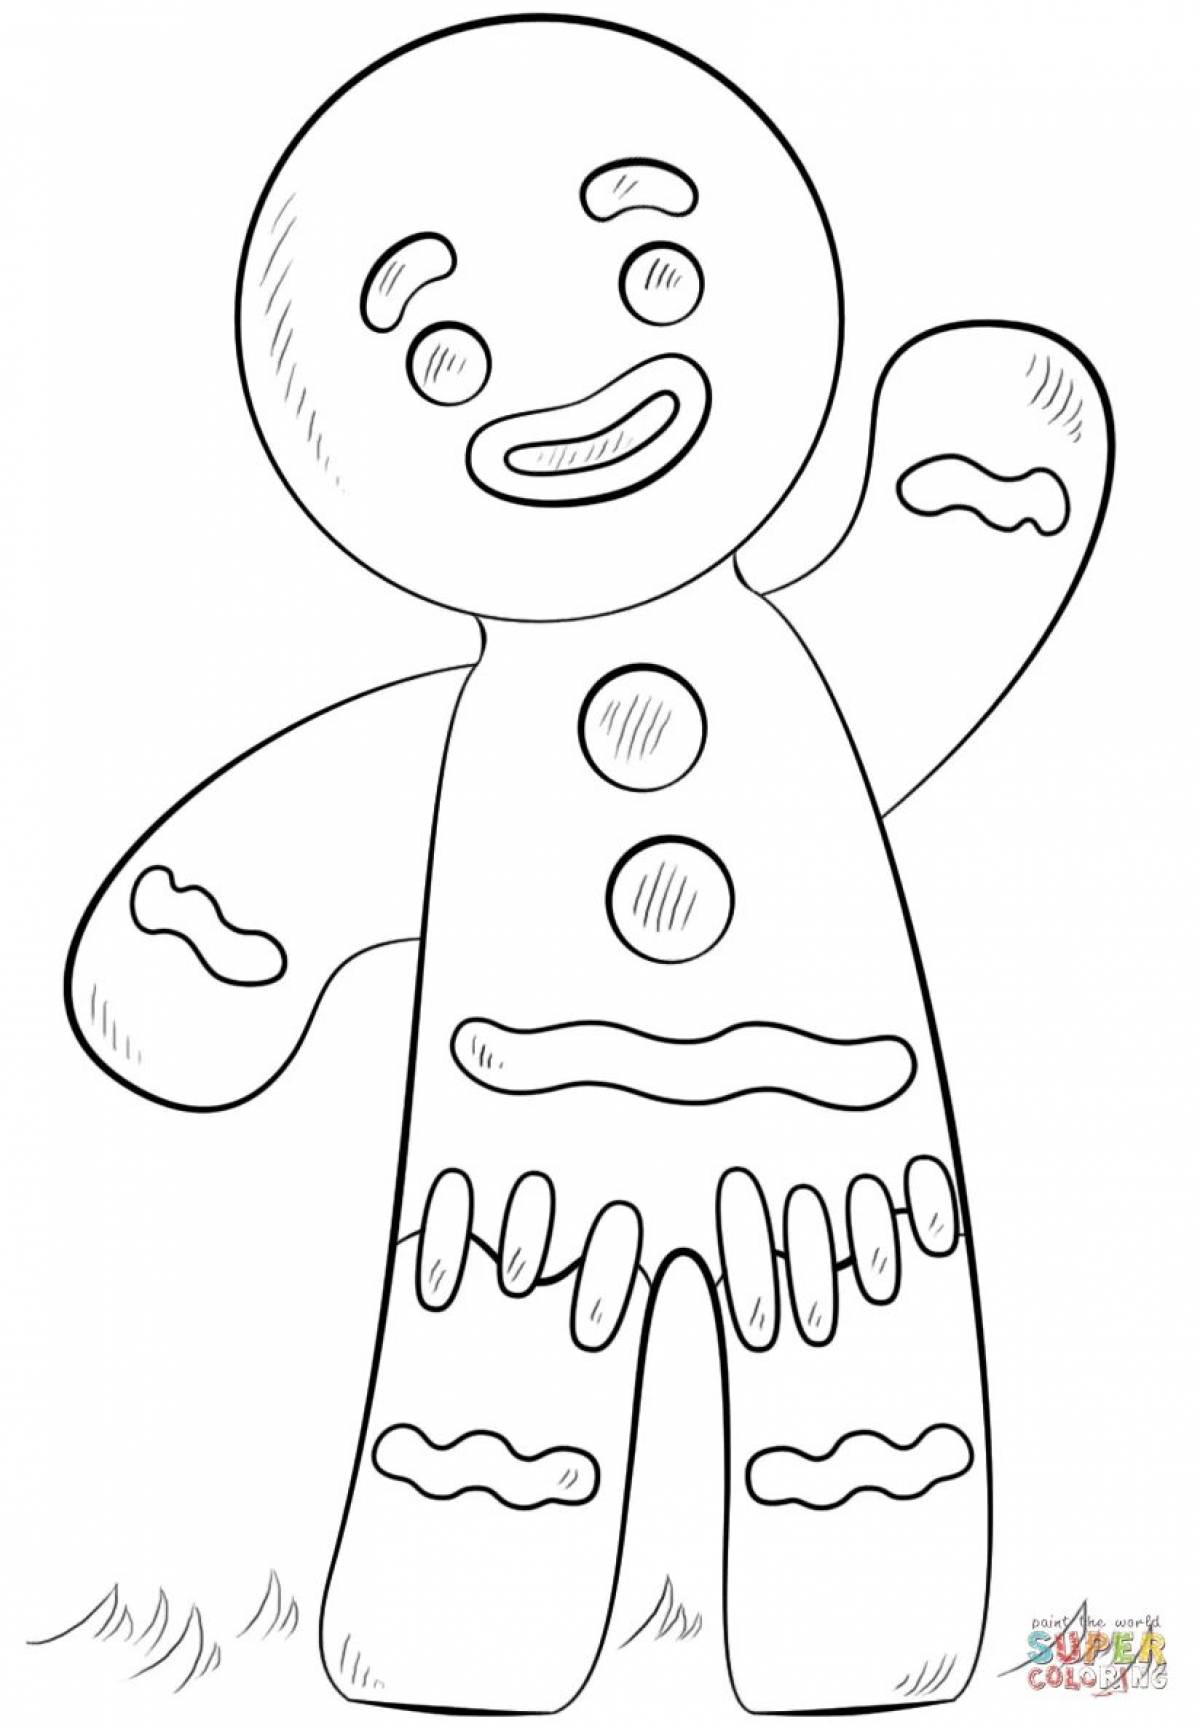 Colouring awesome gingerbread man